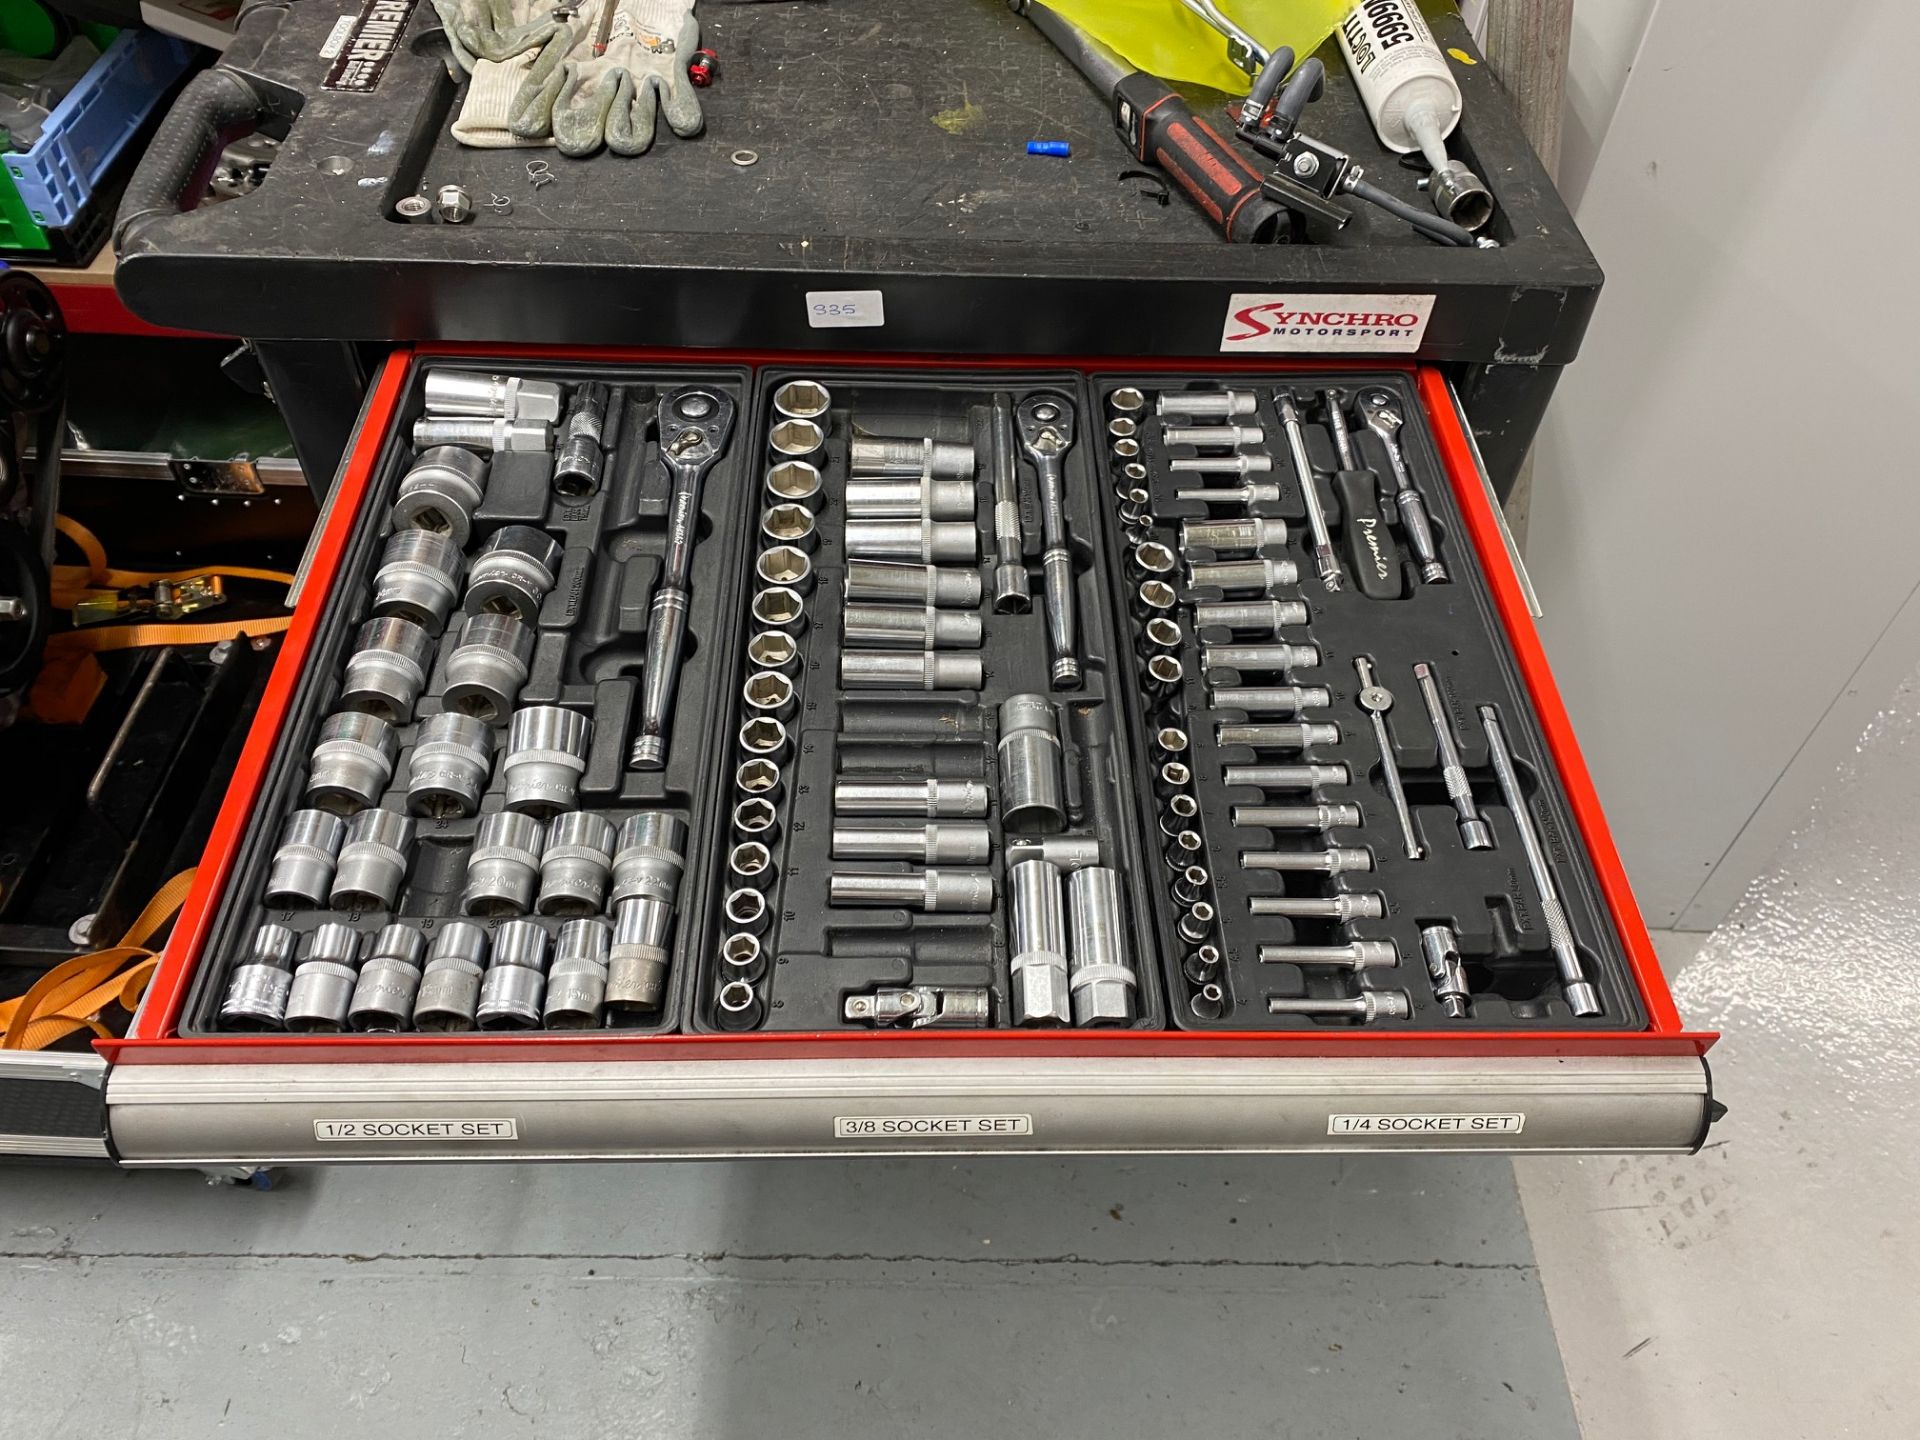 Sealey Premier 8 drawer mobile toolbox including the following tools, metric sockets 10-32mm, 1/ - Bild 2 aus 10